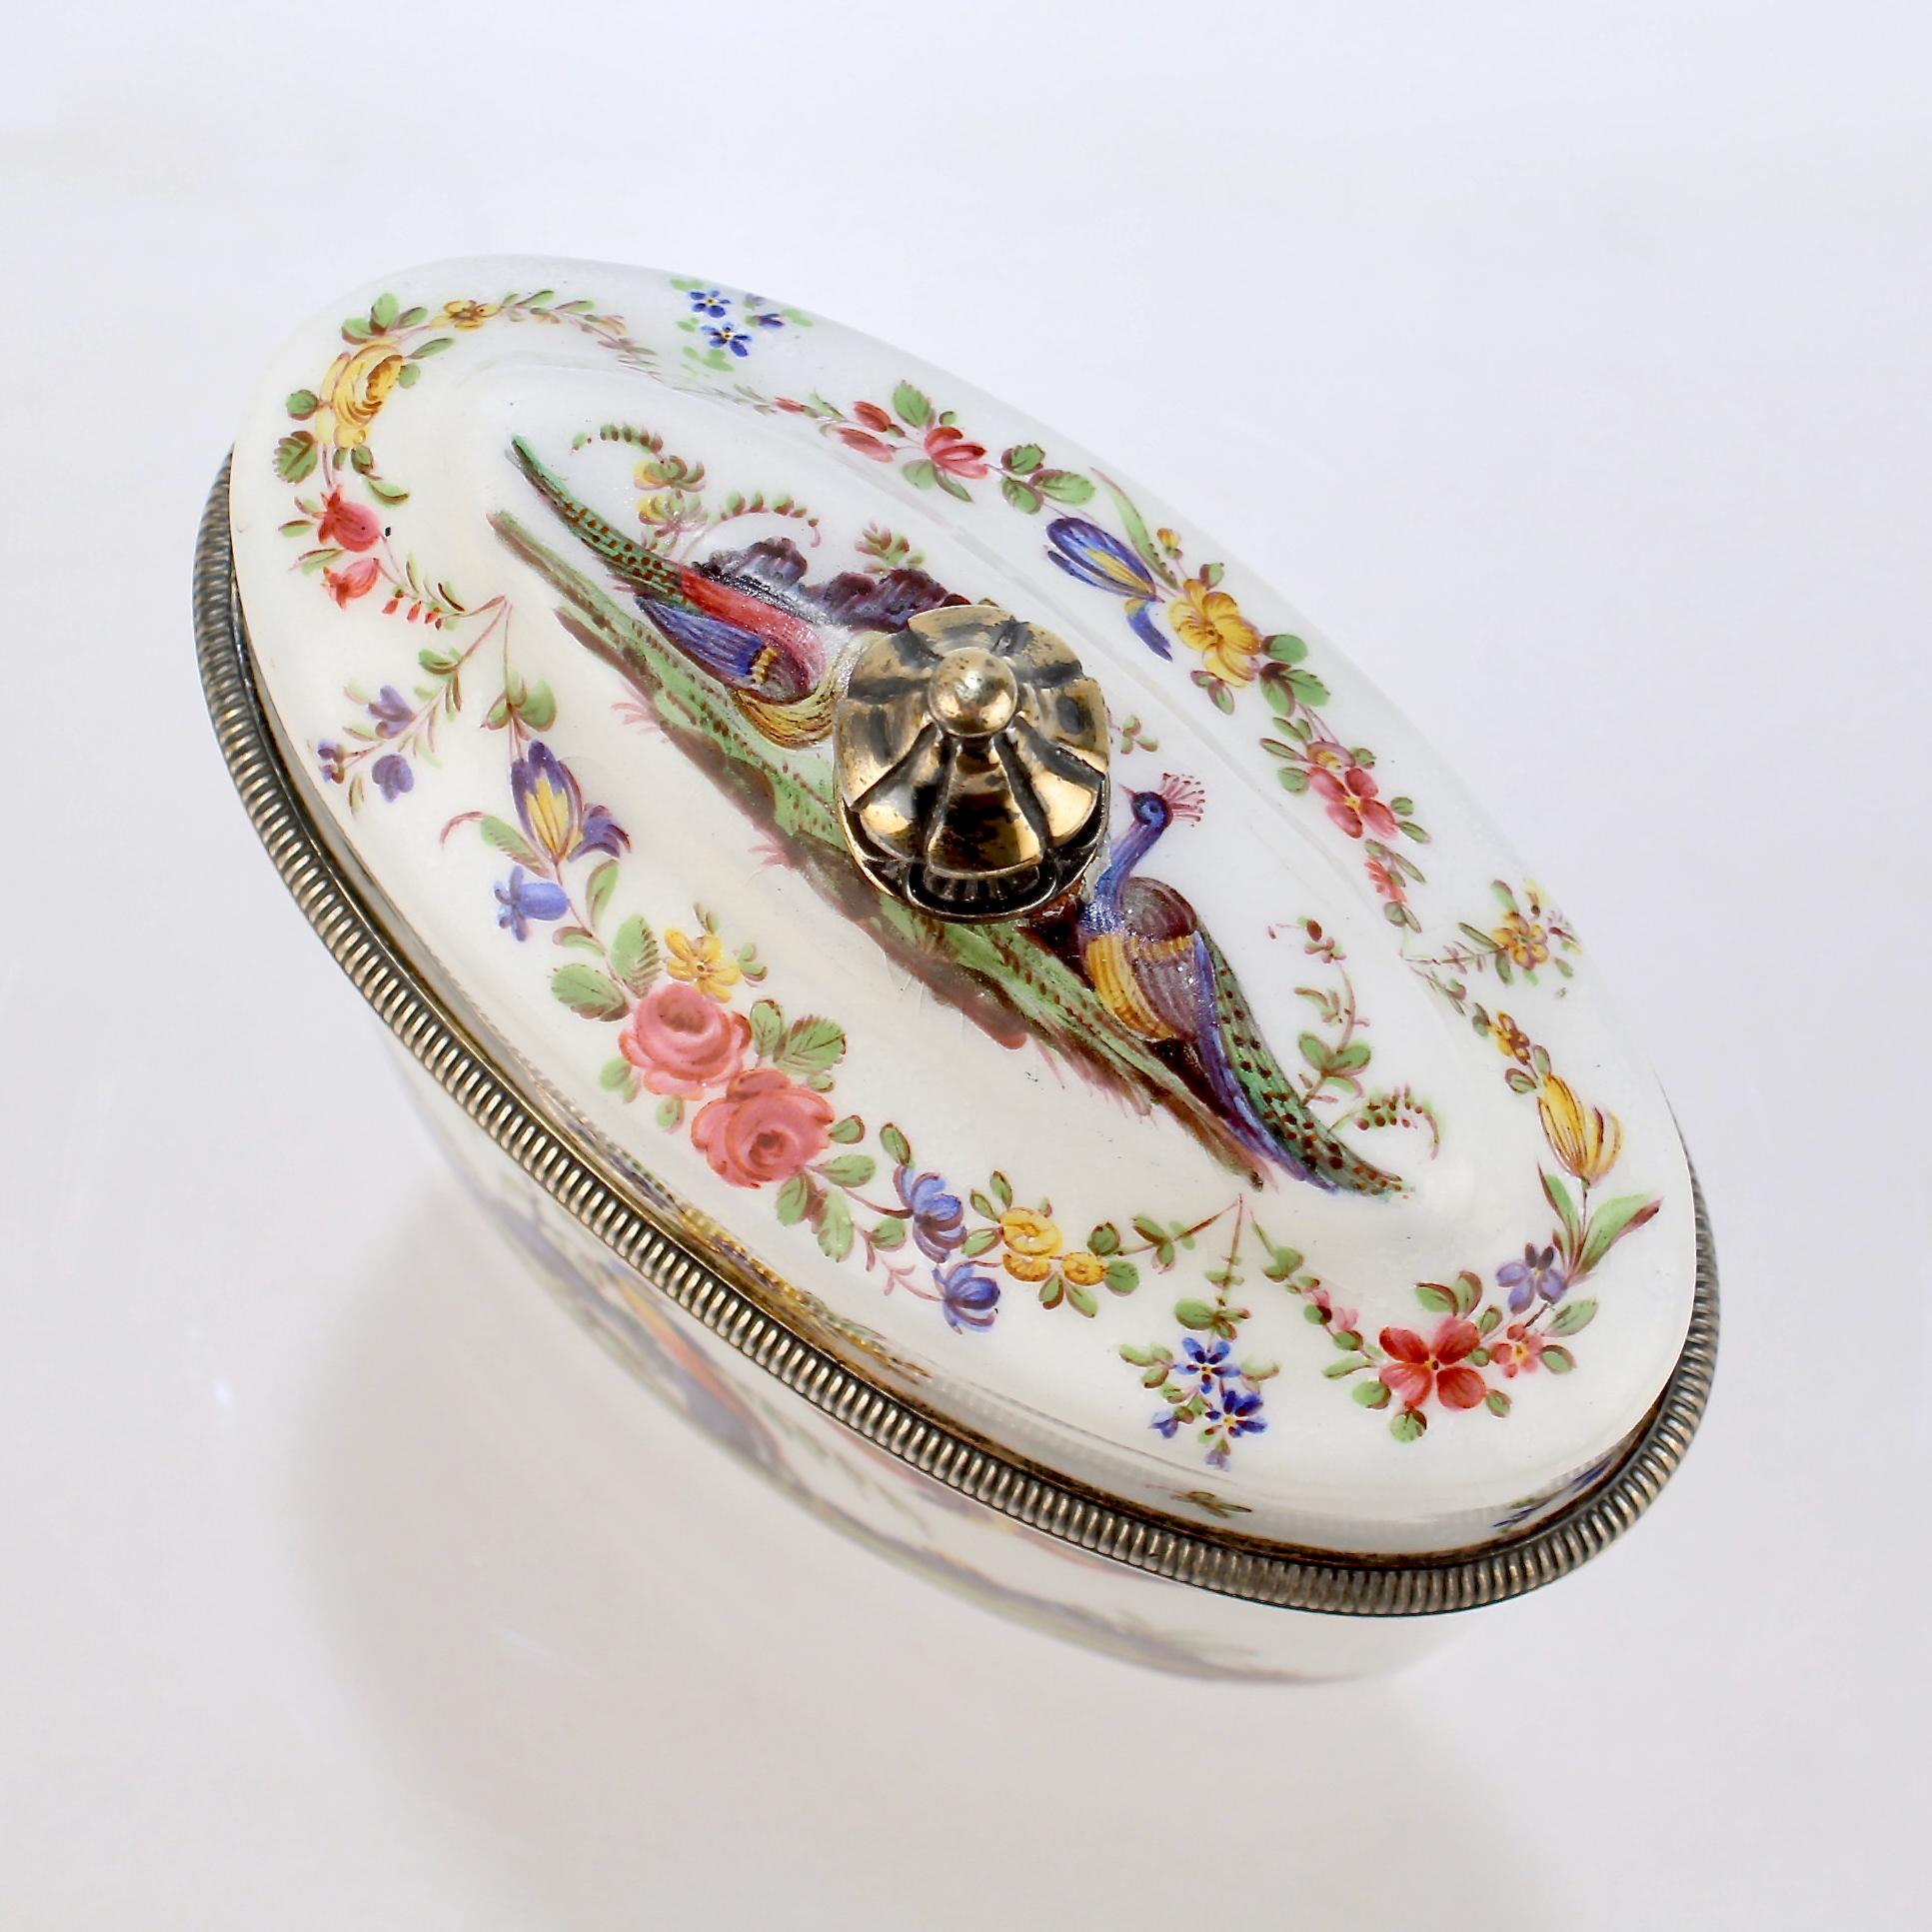 Antique 19th Century French Beaux-Arts Silver-Mounted Enamel Tea Caddy by Risler For Sale 4